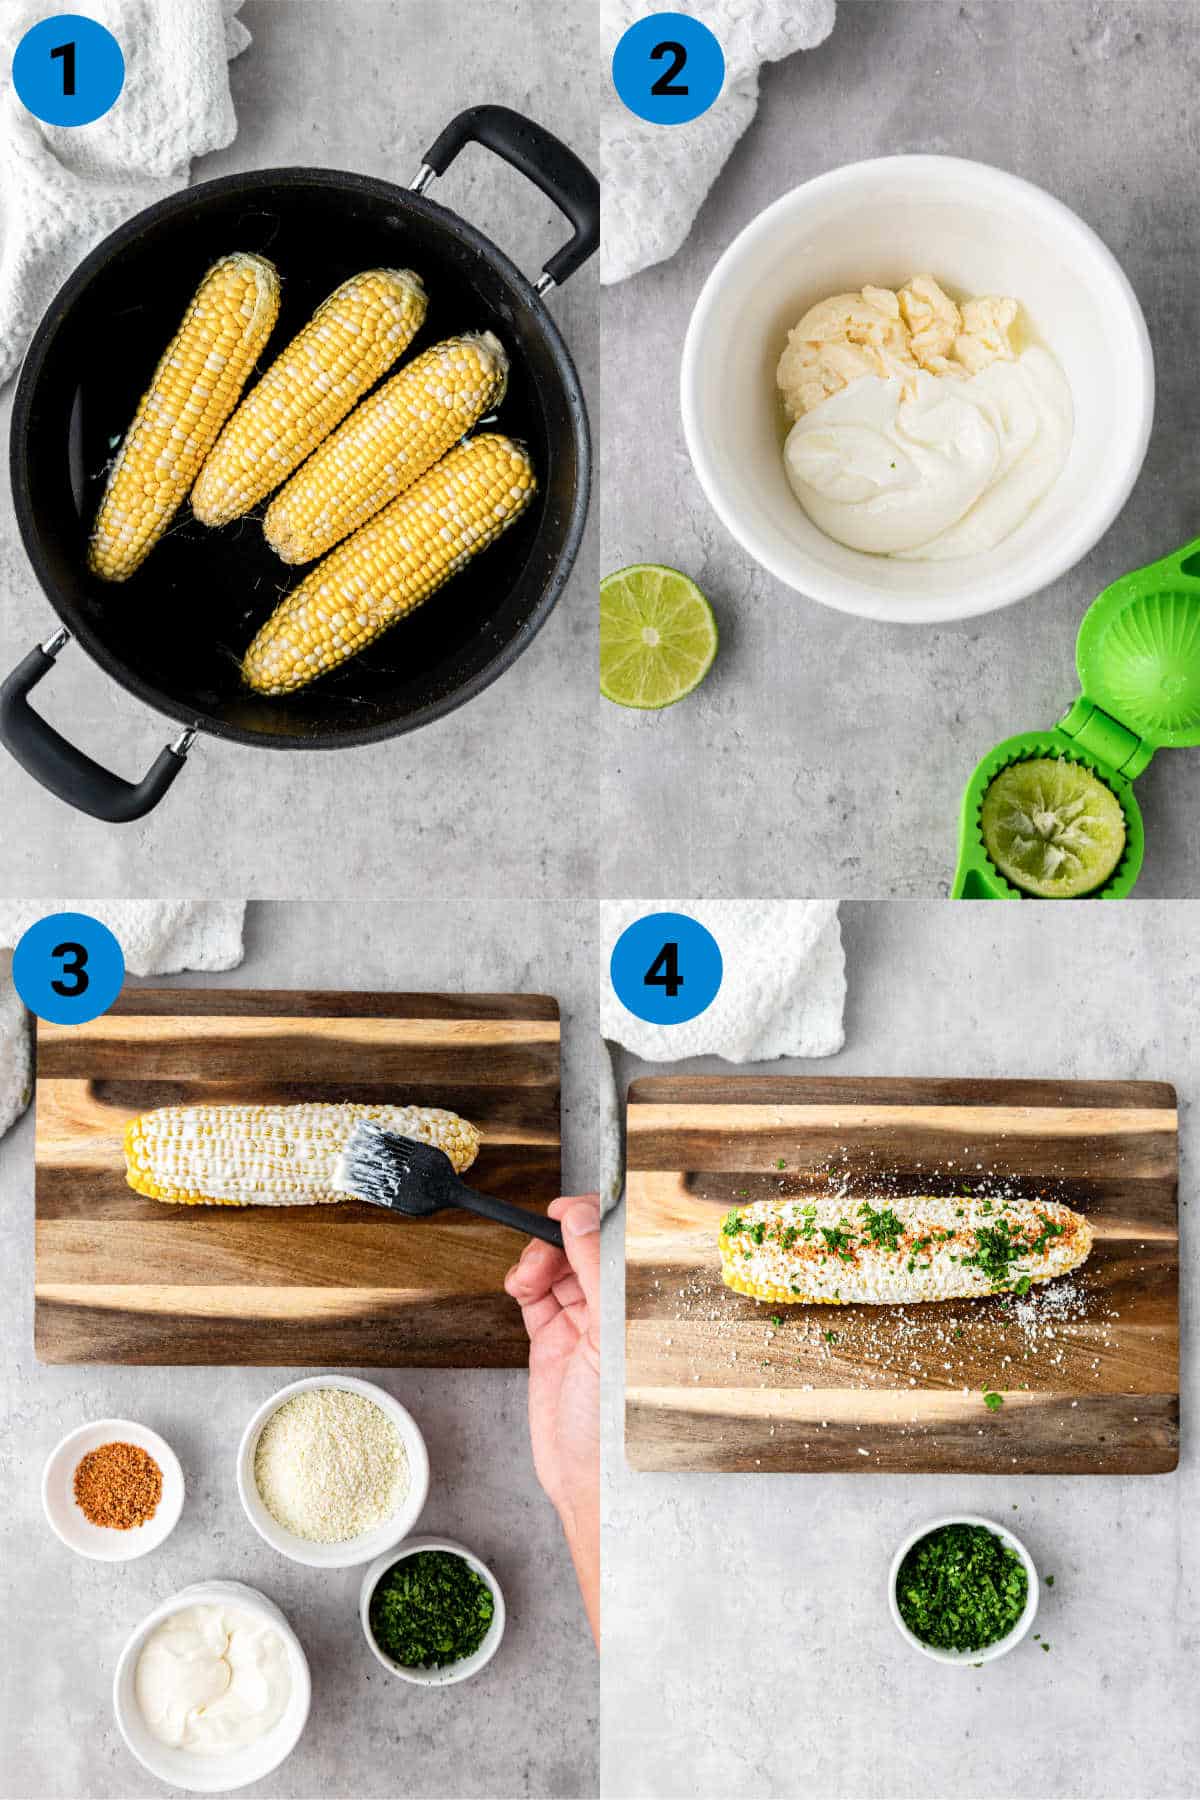 A collage of four images showing how to make Mexican Street Corn, recipe steps 1 through 4.